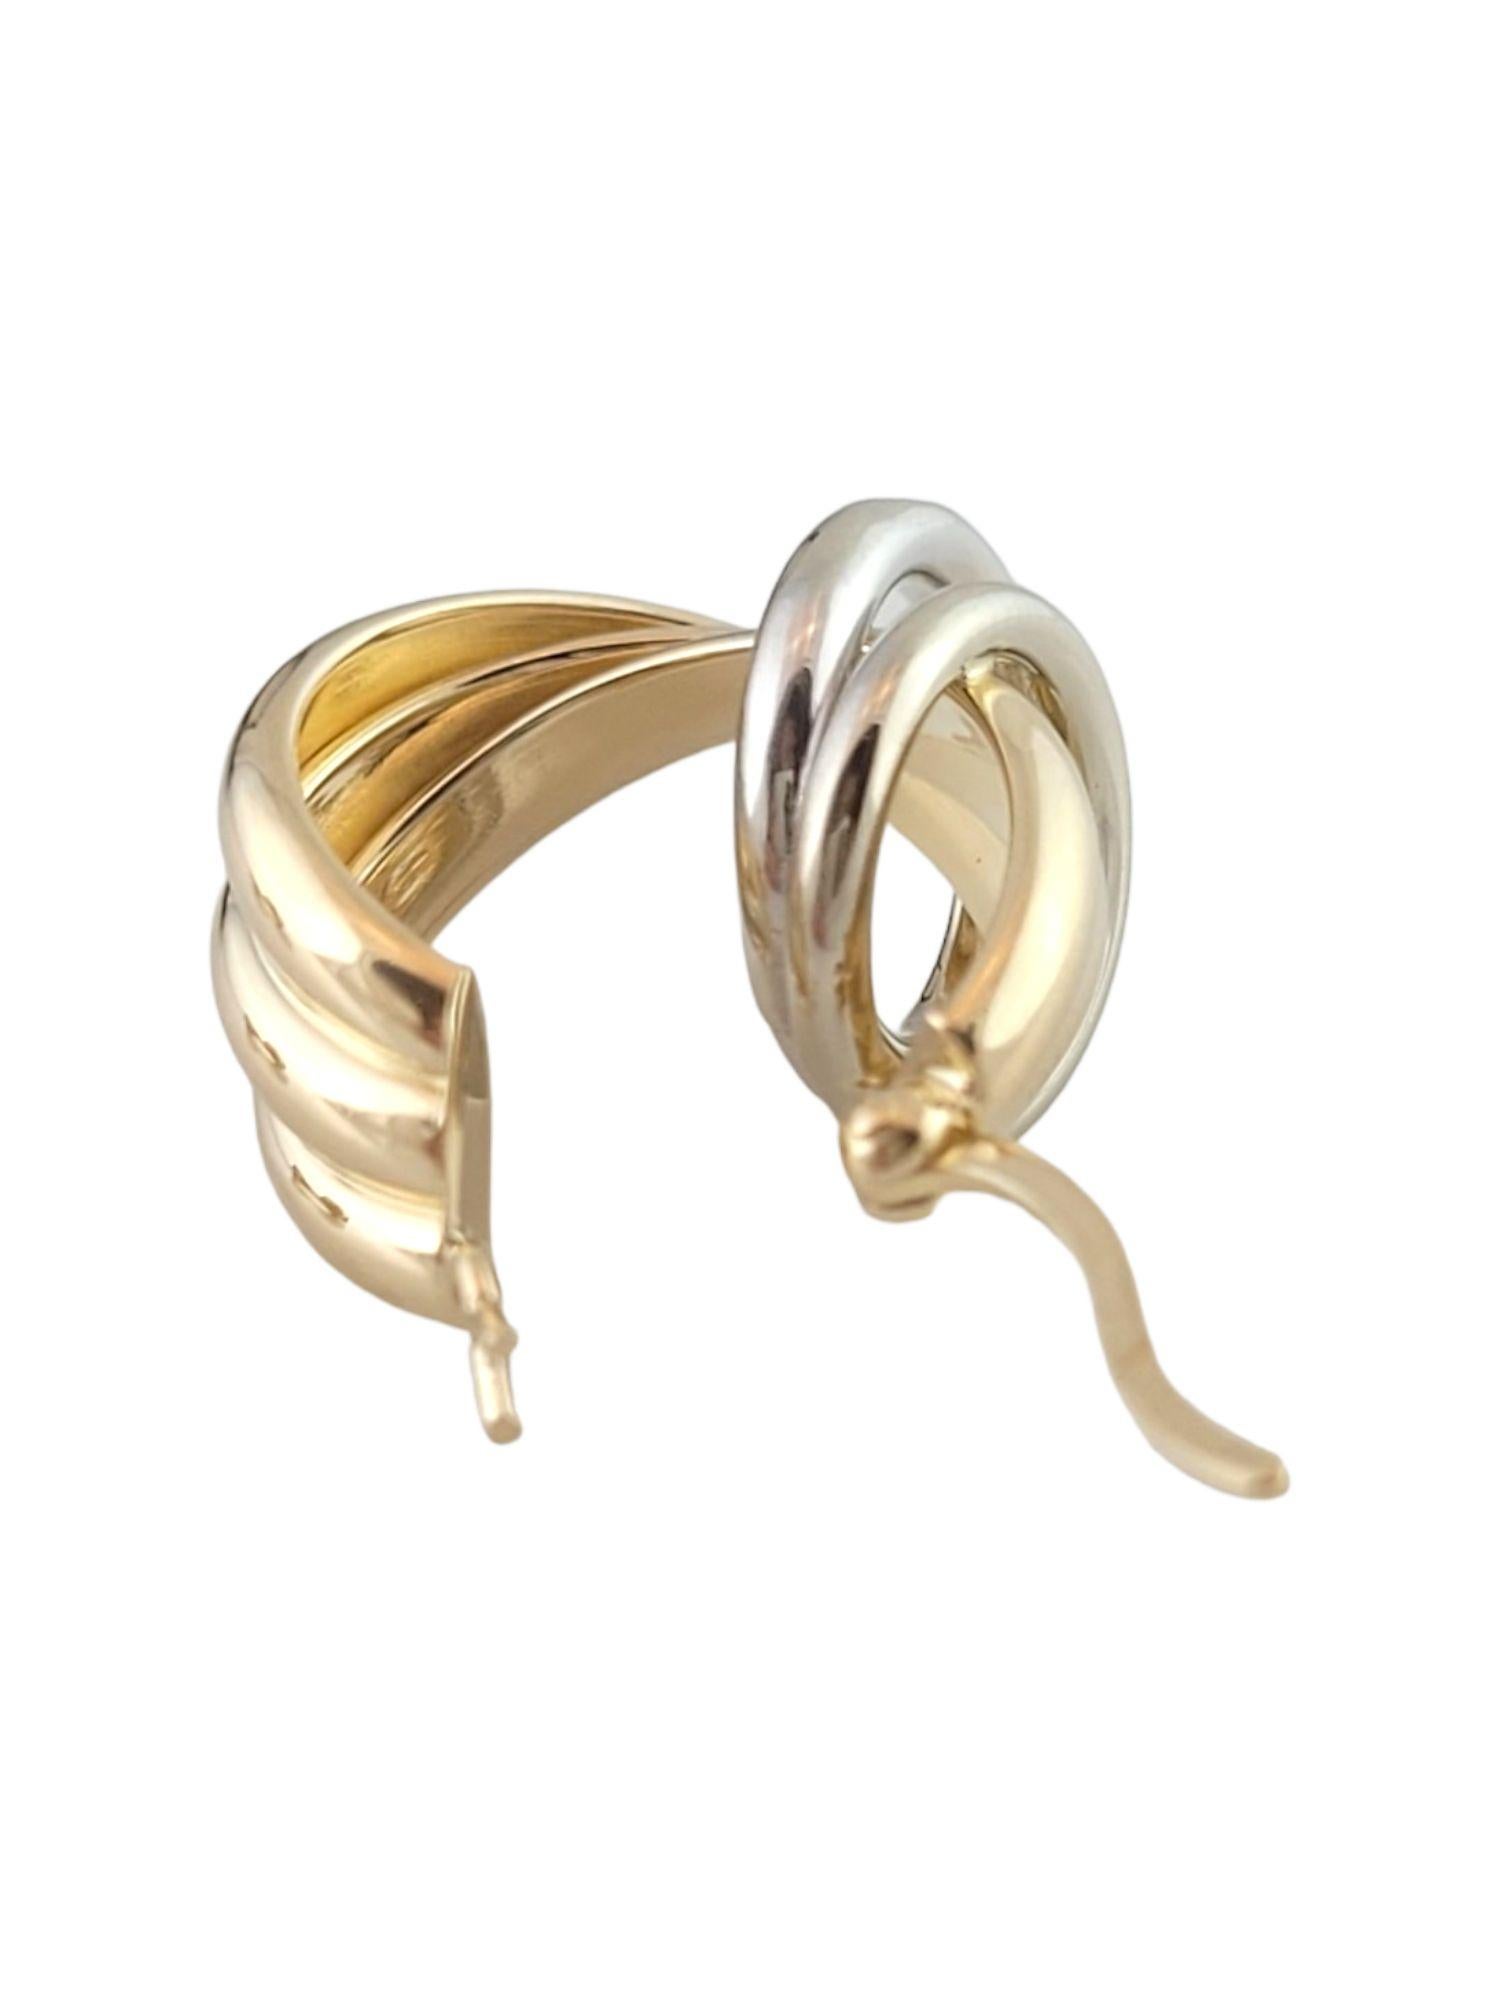  14K Yellow and White Gold Two Toned Twisted Hoops #14920 1